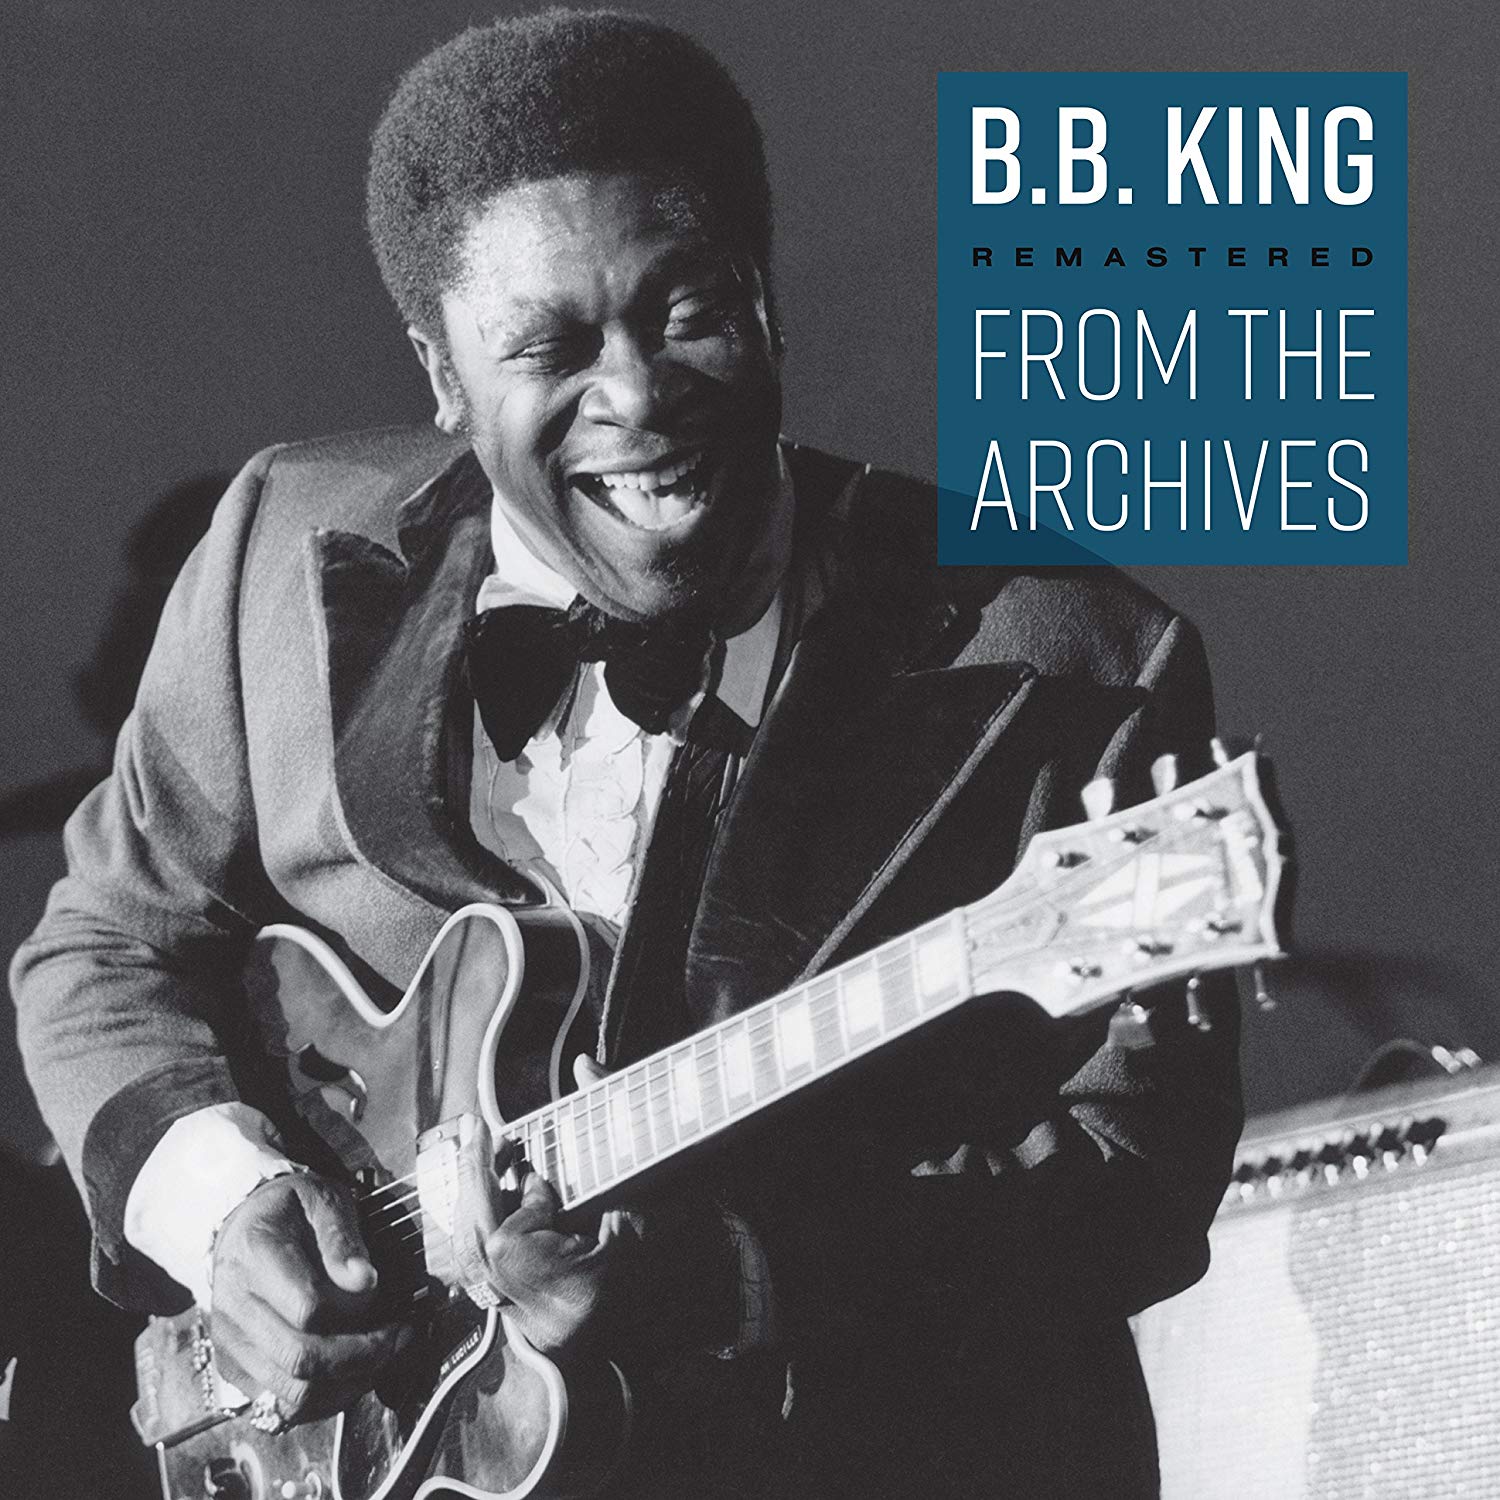  BB KING - FROM THE ARCHIVES $20 remastered 180 gram vinyl @ 2017 Red Bank Records 